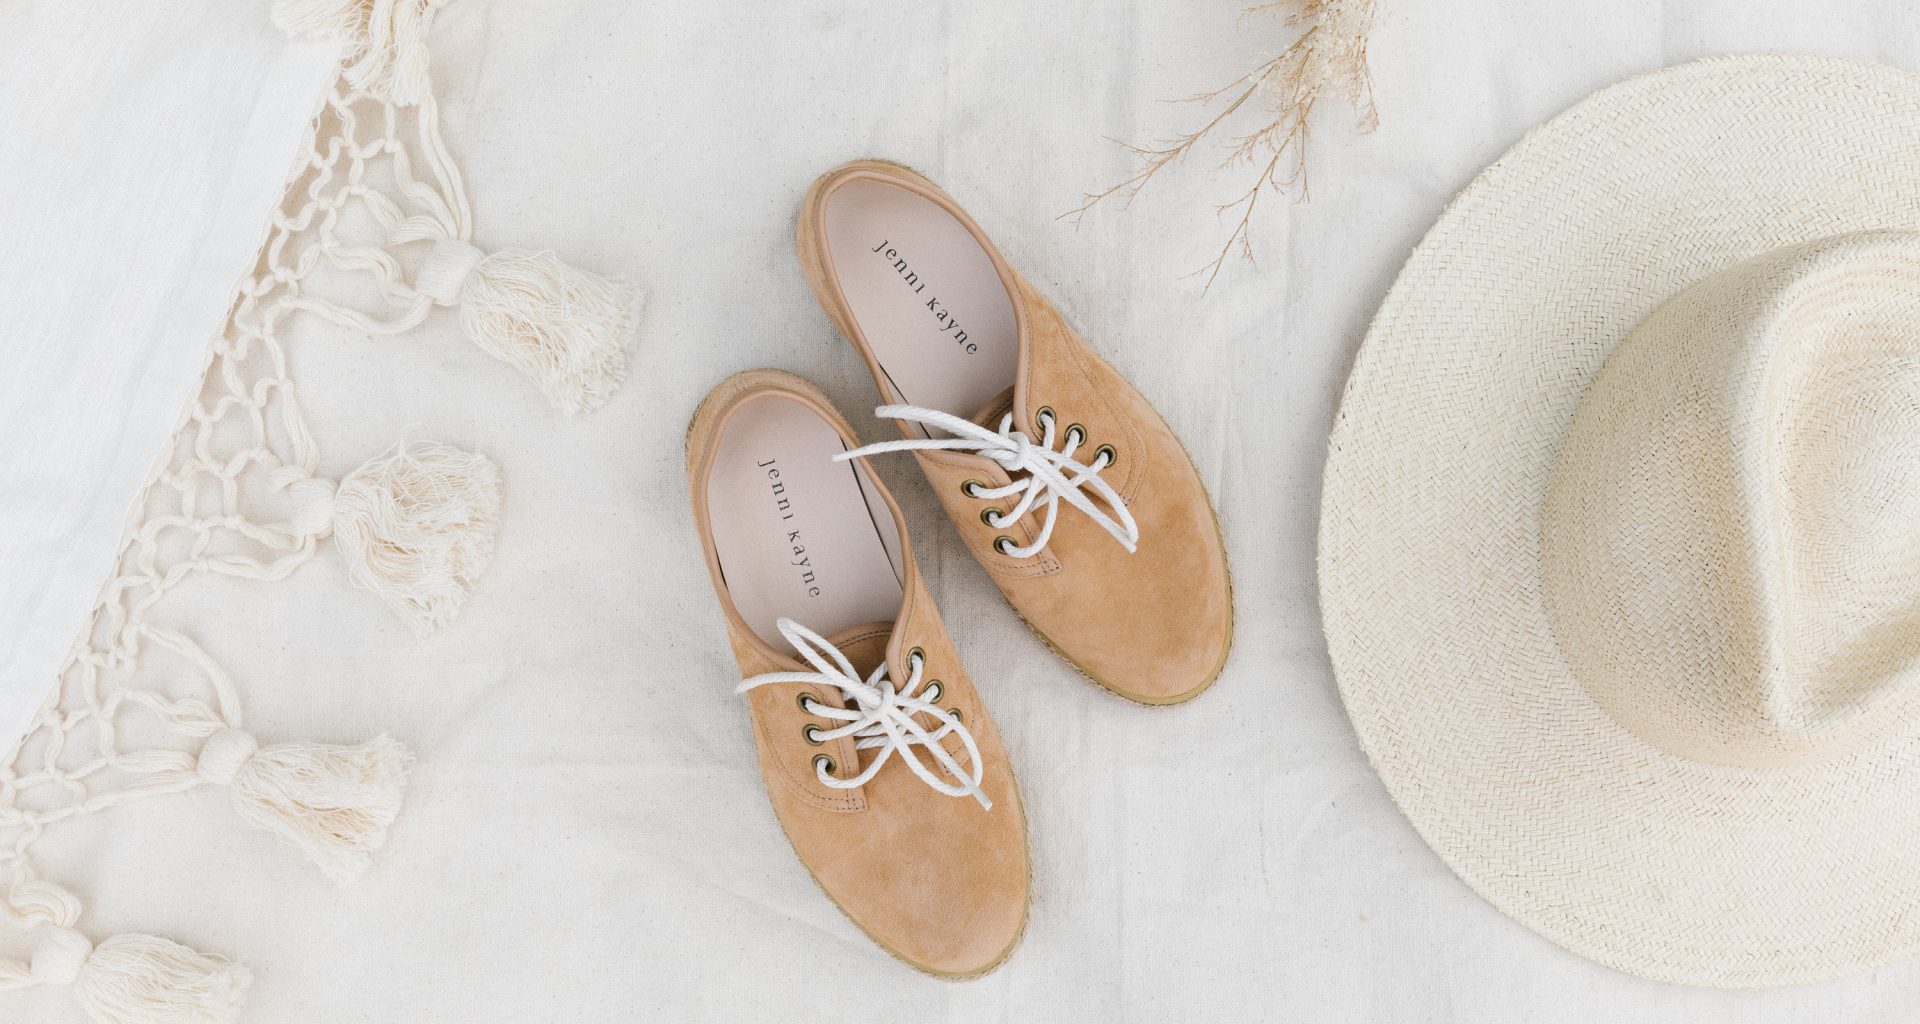 Summer Shoes & How to Wear Them | Style | Rip & Tan